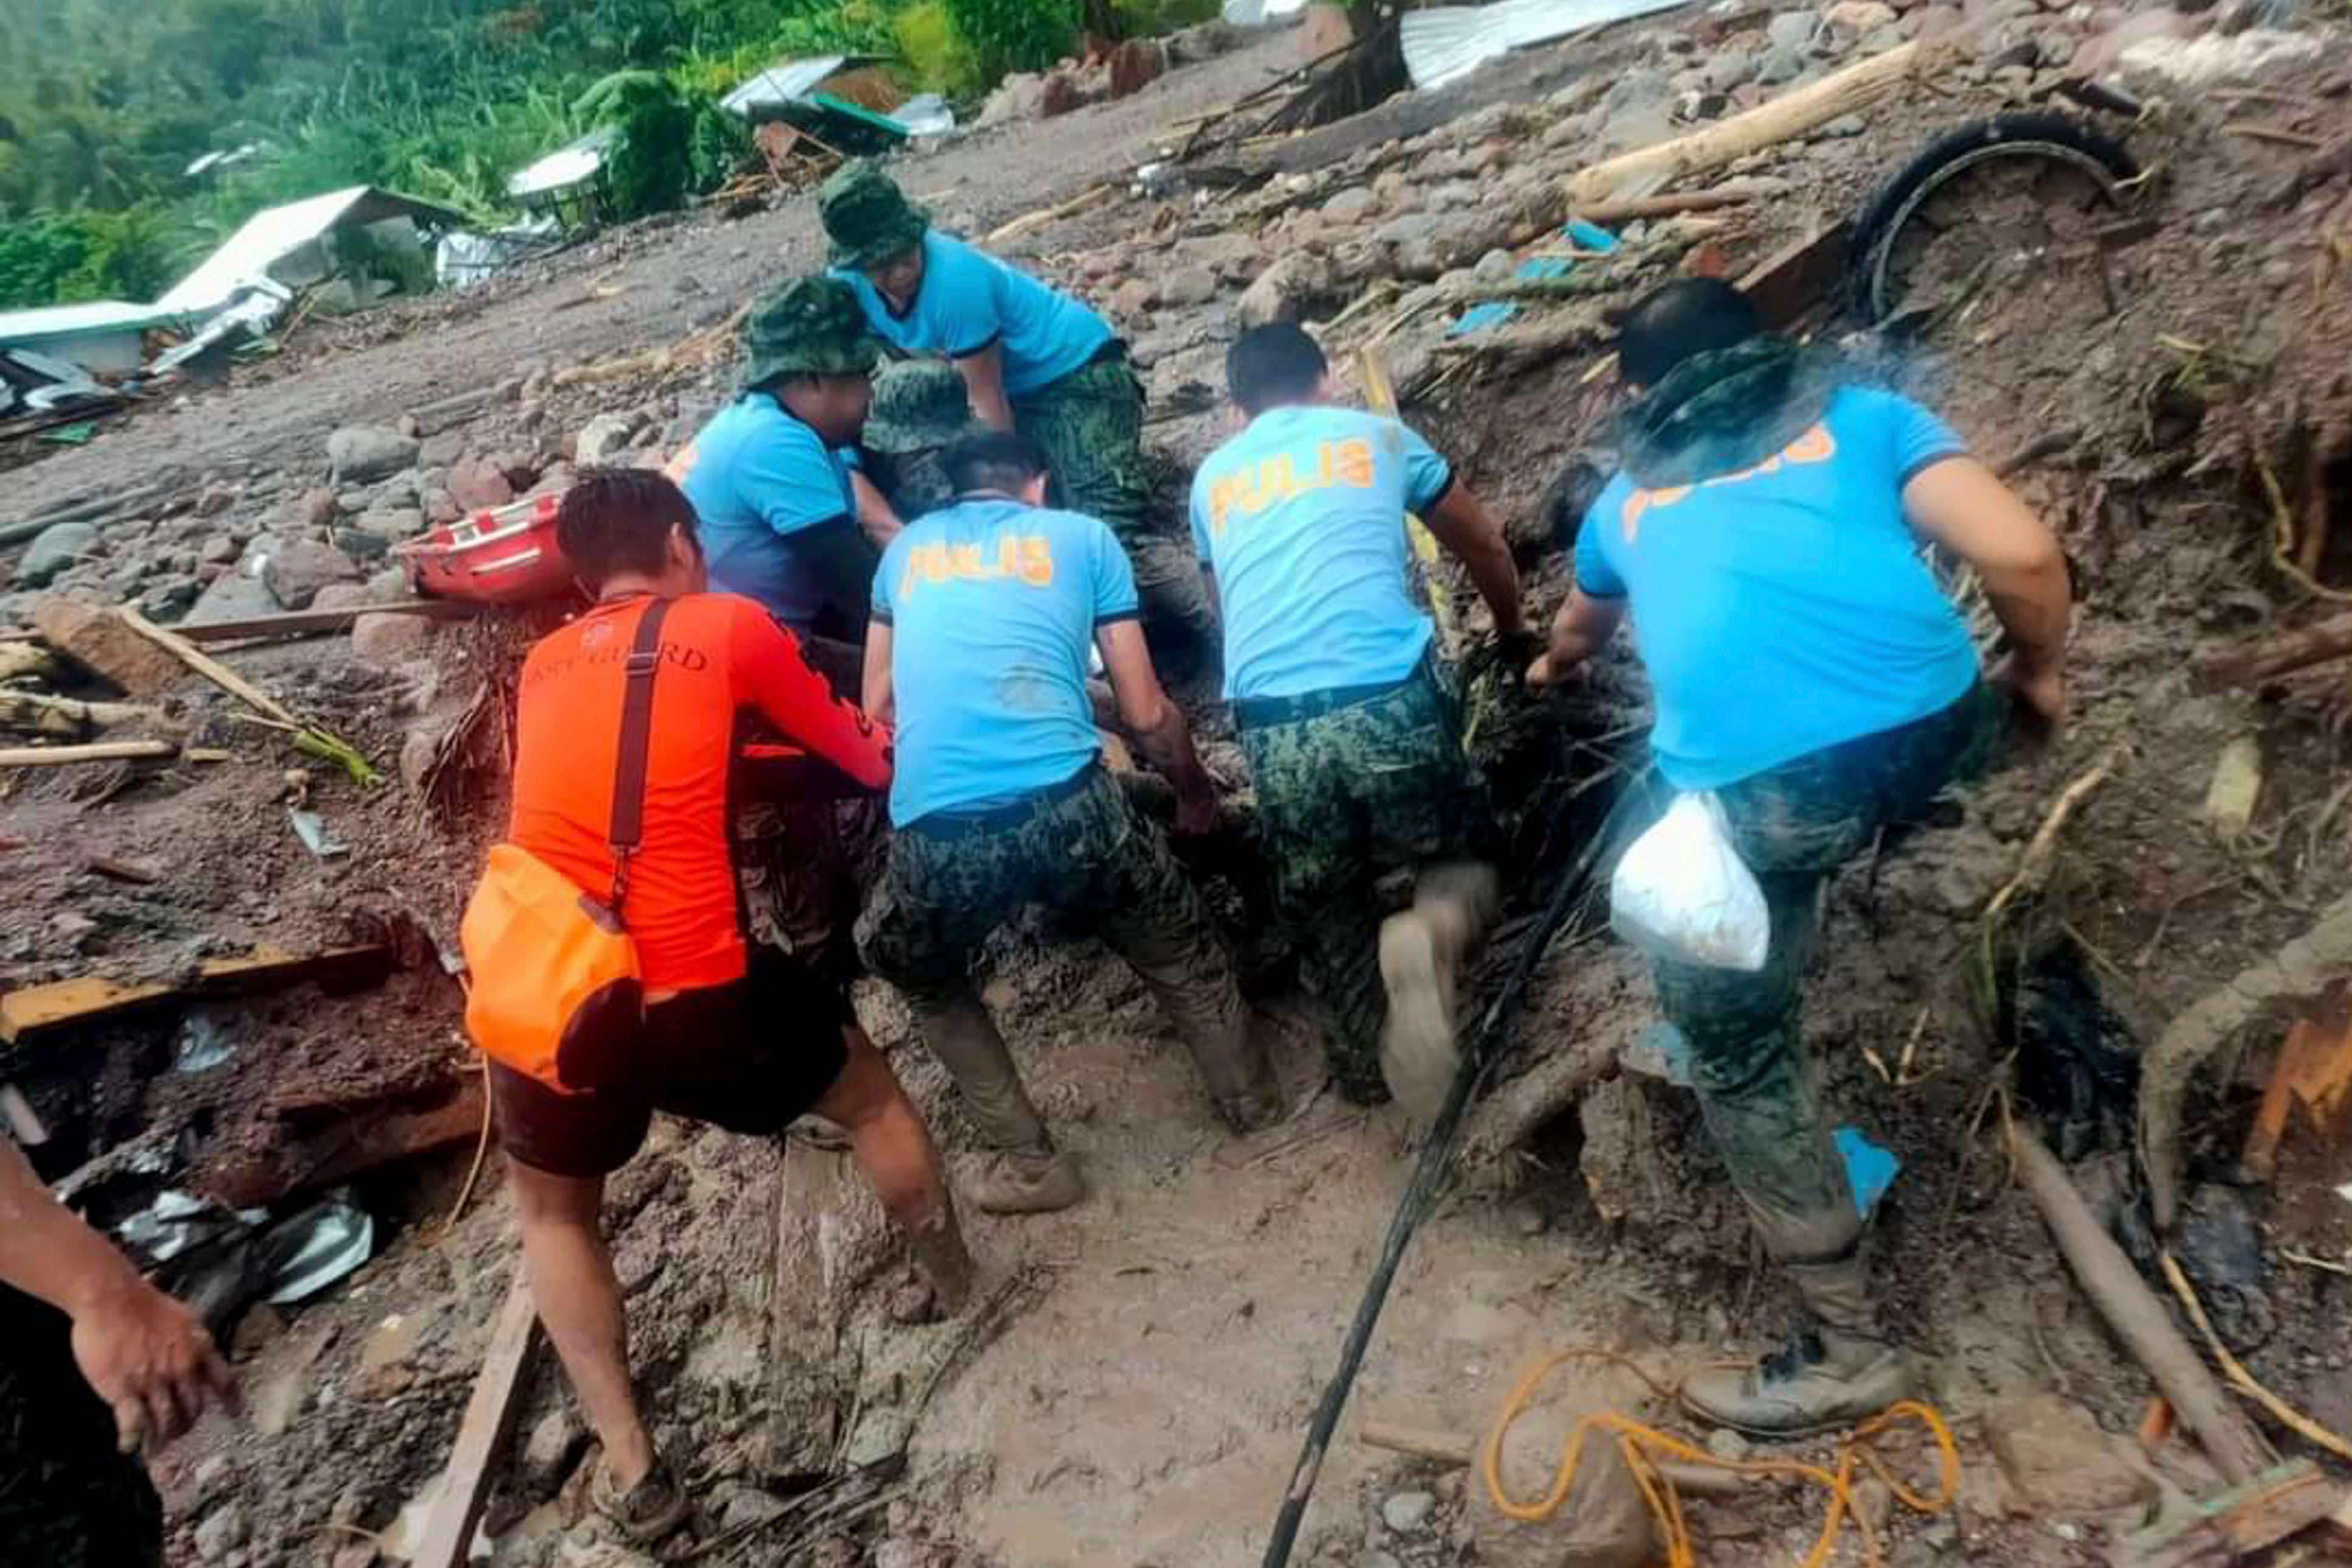 Rescuers retrieve bodies amid landslides caused by tropical storm Nalgae in Maguindanao province, southern Philippines